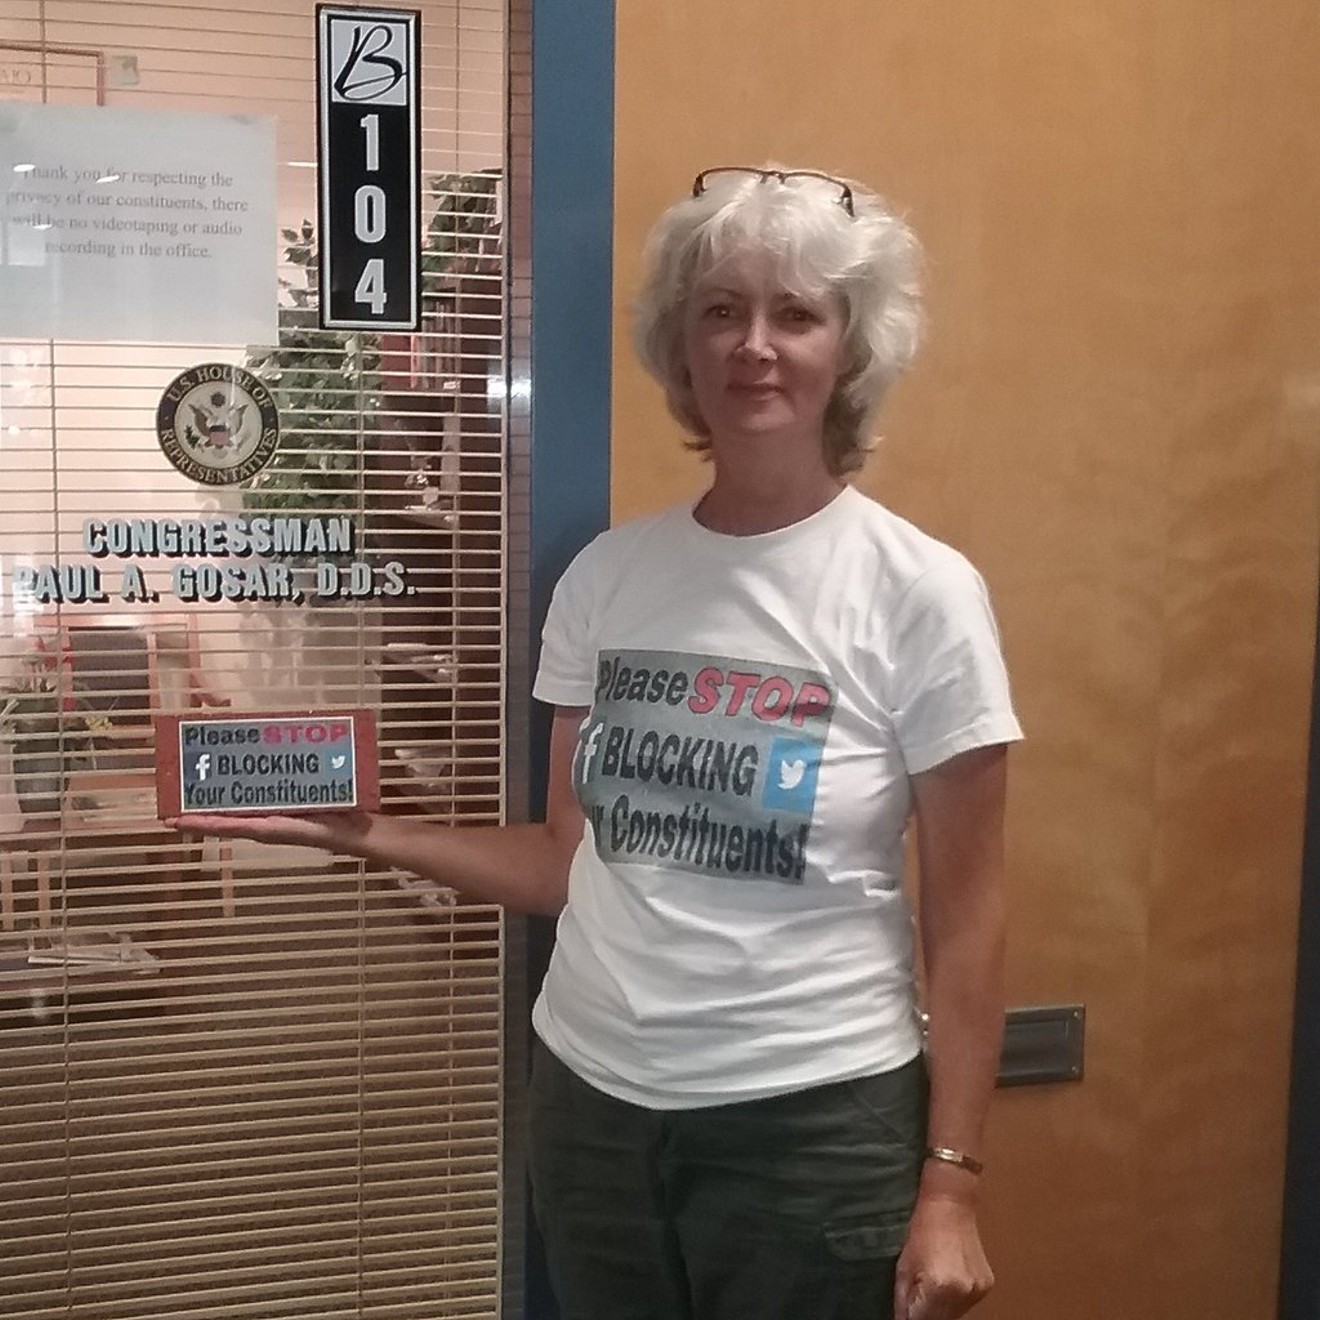 J'aime Morgaine of Indivisible Kingman plans to deliver blocks to Representative Paul Gosar's office several times a week until she's unblocked from his Facebook page.